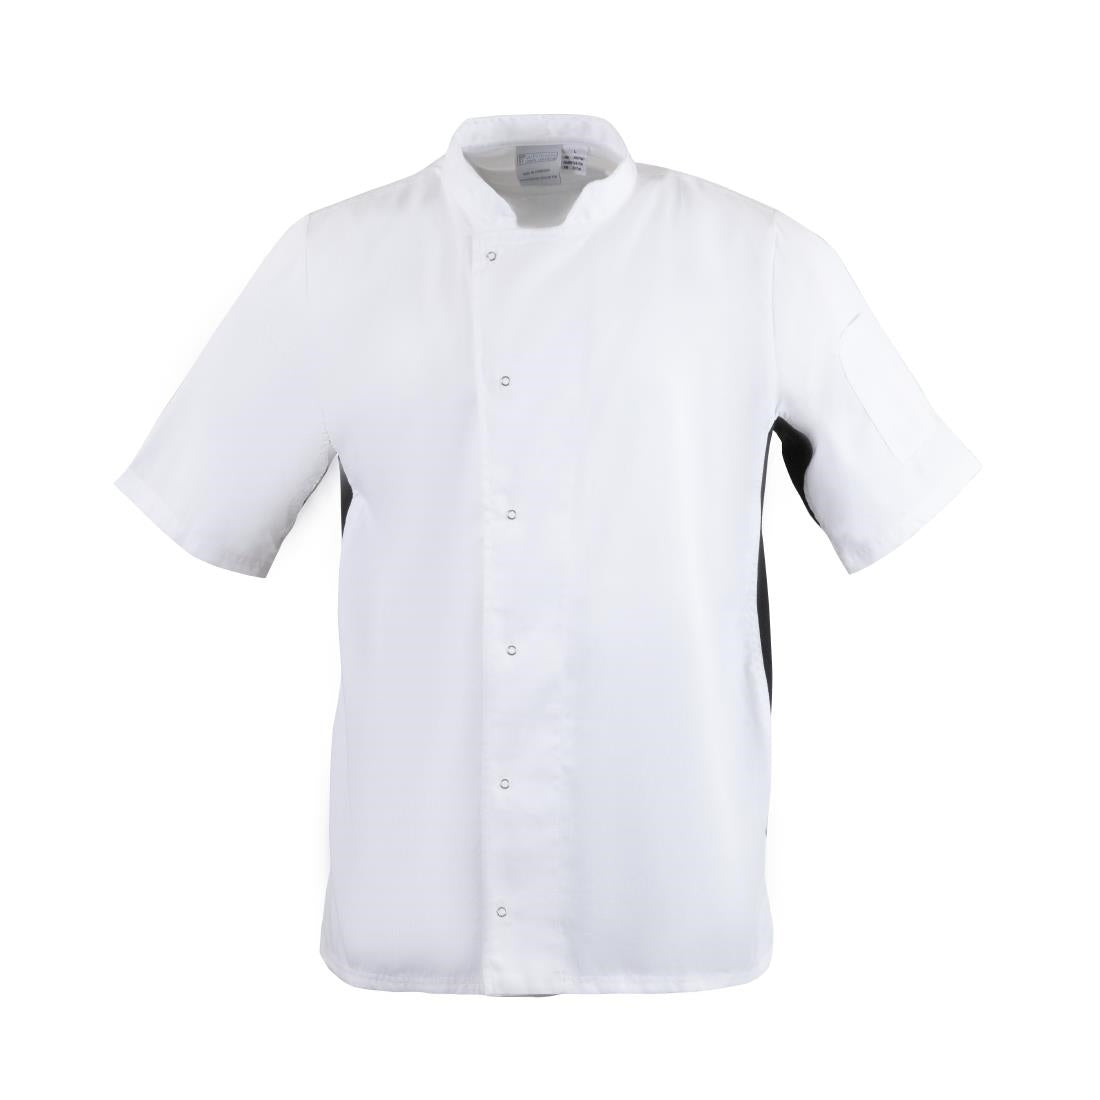 A928-L Whites Nevada Unisex Chefs Jacket Short Sleeve Black and White L JD Catering Equipment Solutions Ltd